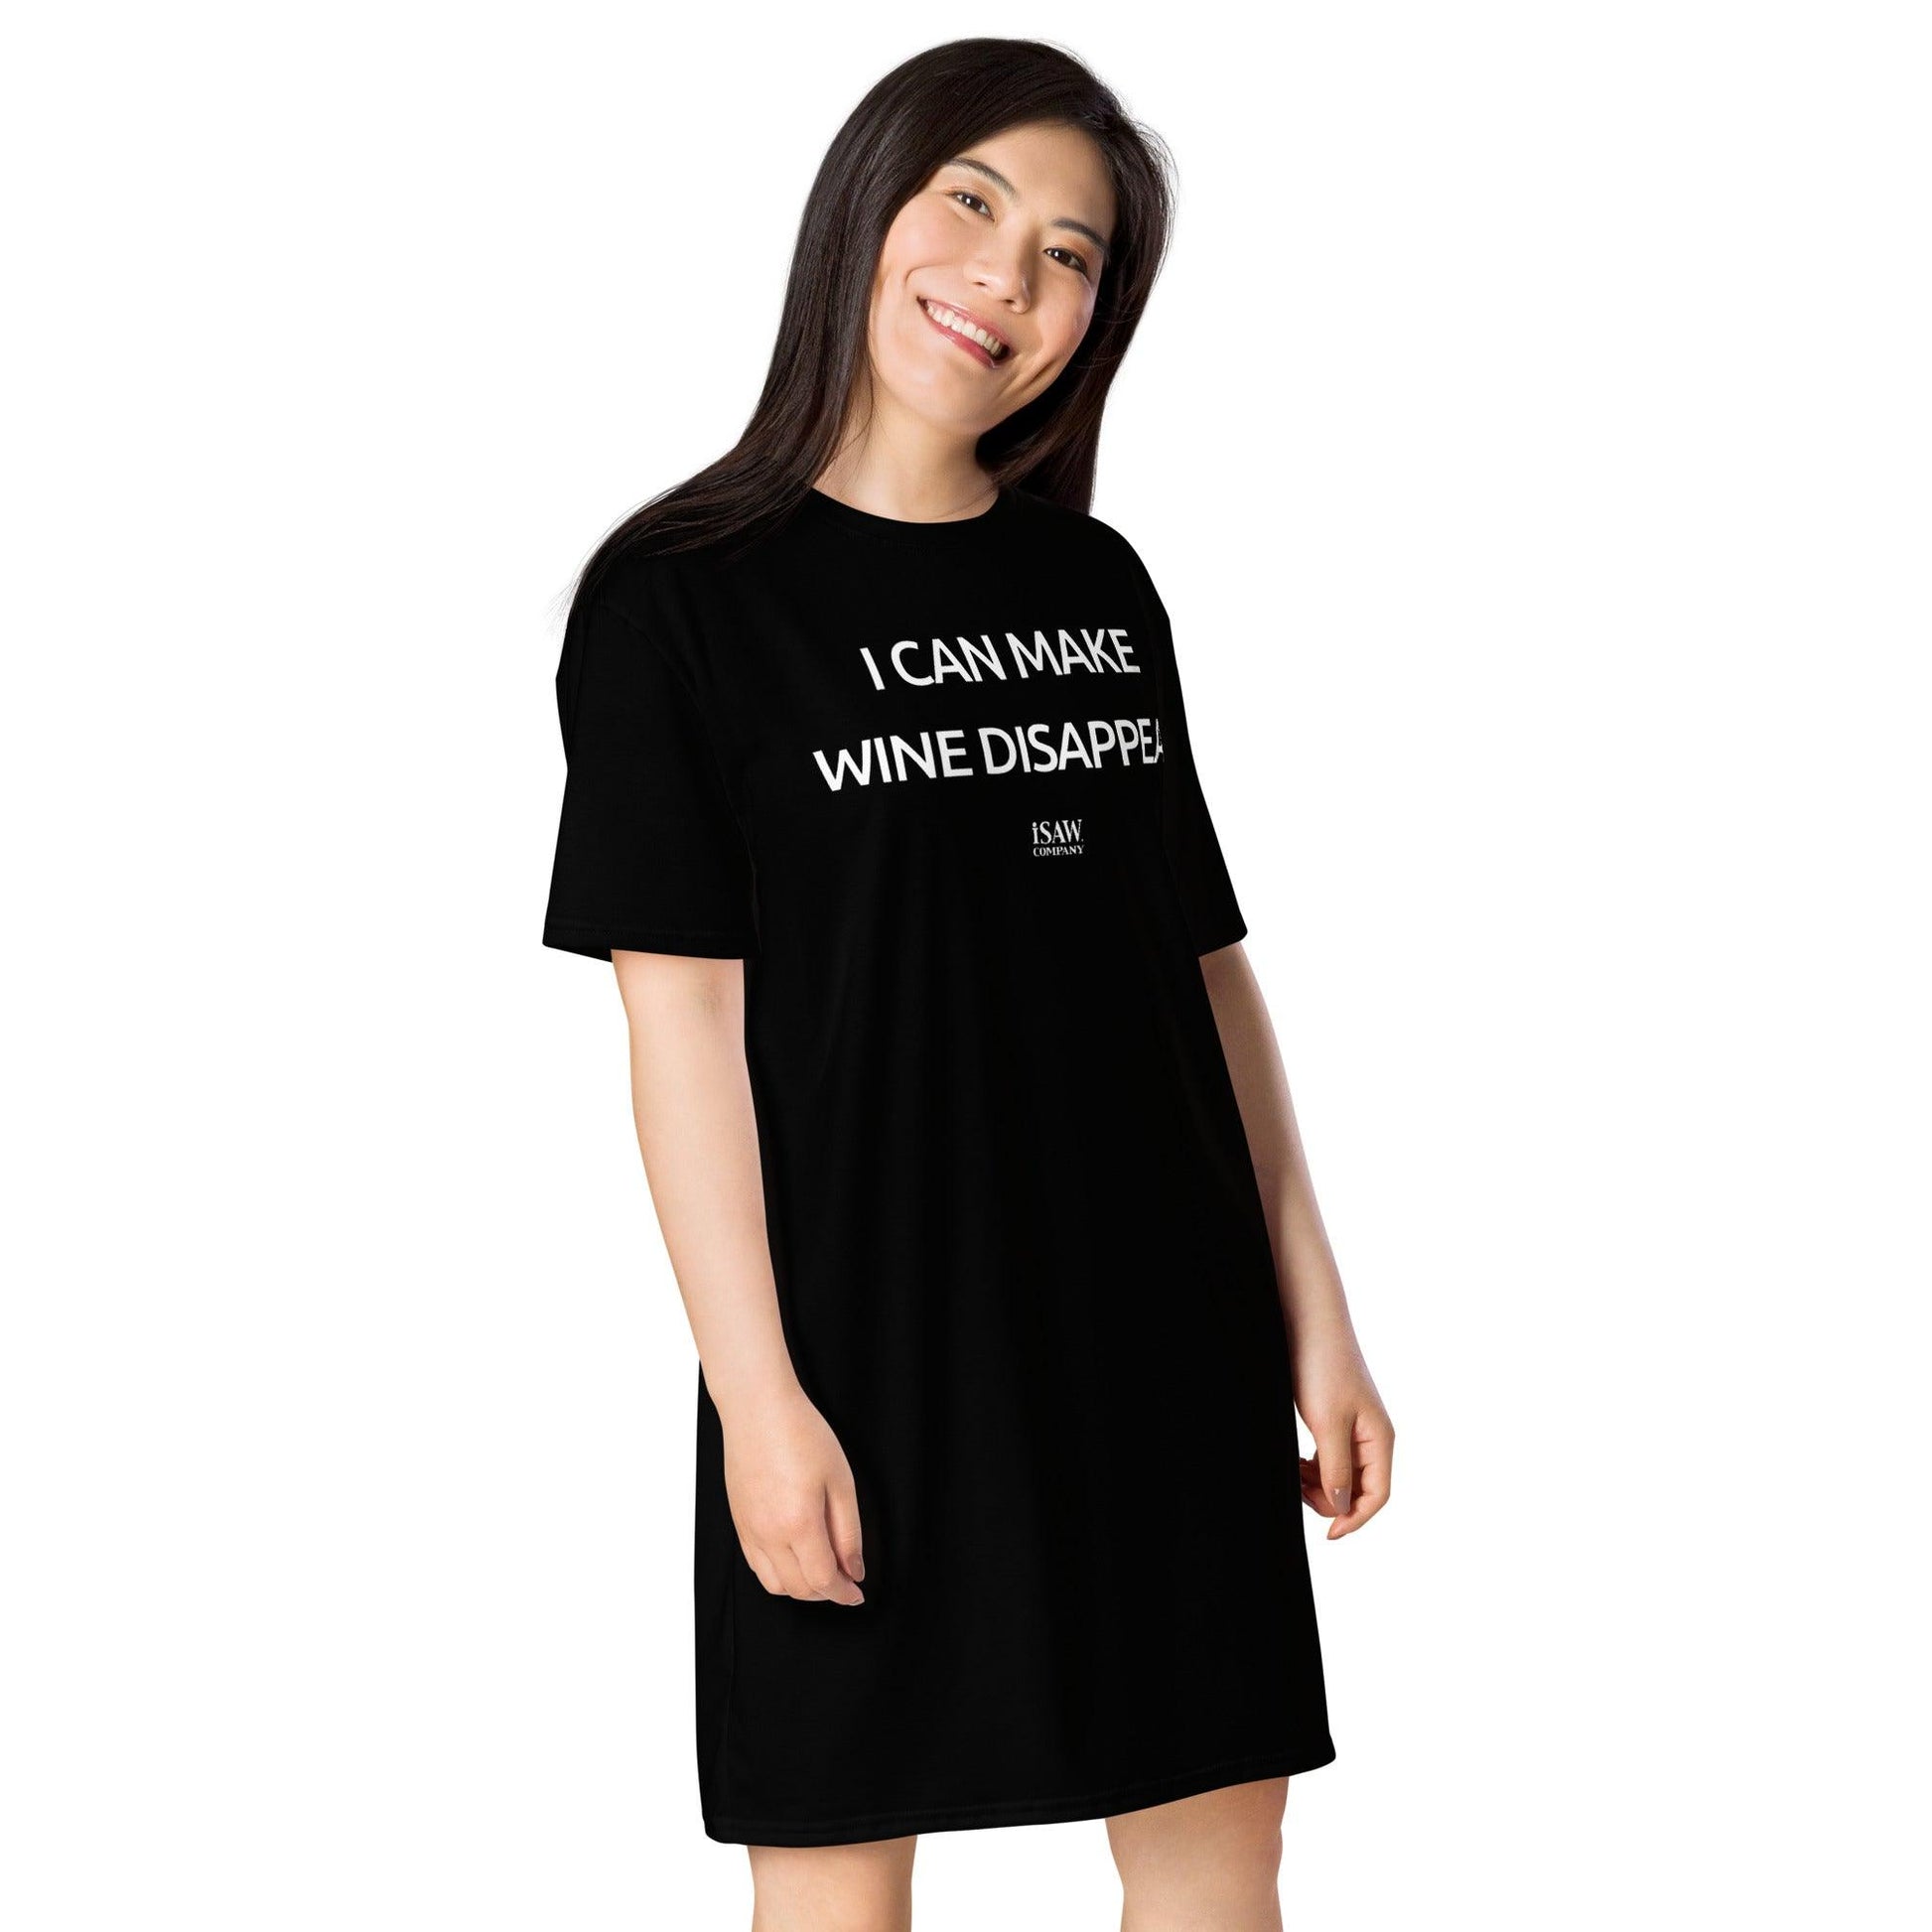 I Can Make Wine Disappear - Womens Black T-Shirt Dress - iSAW Company